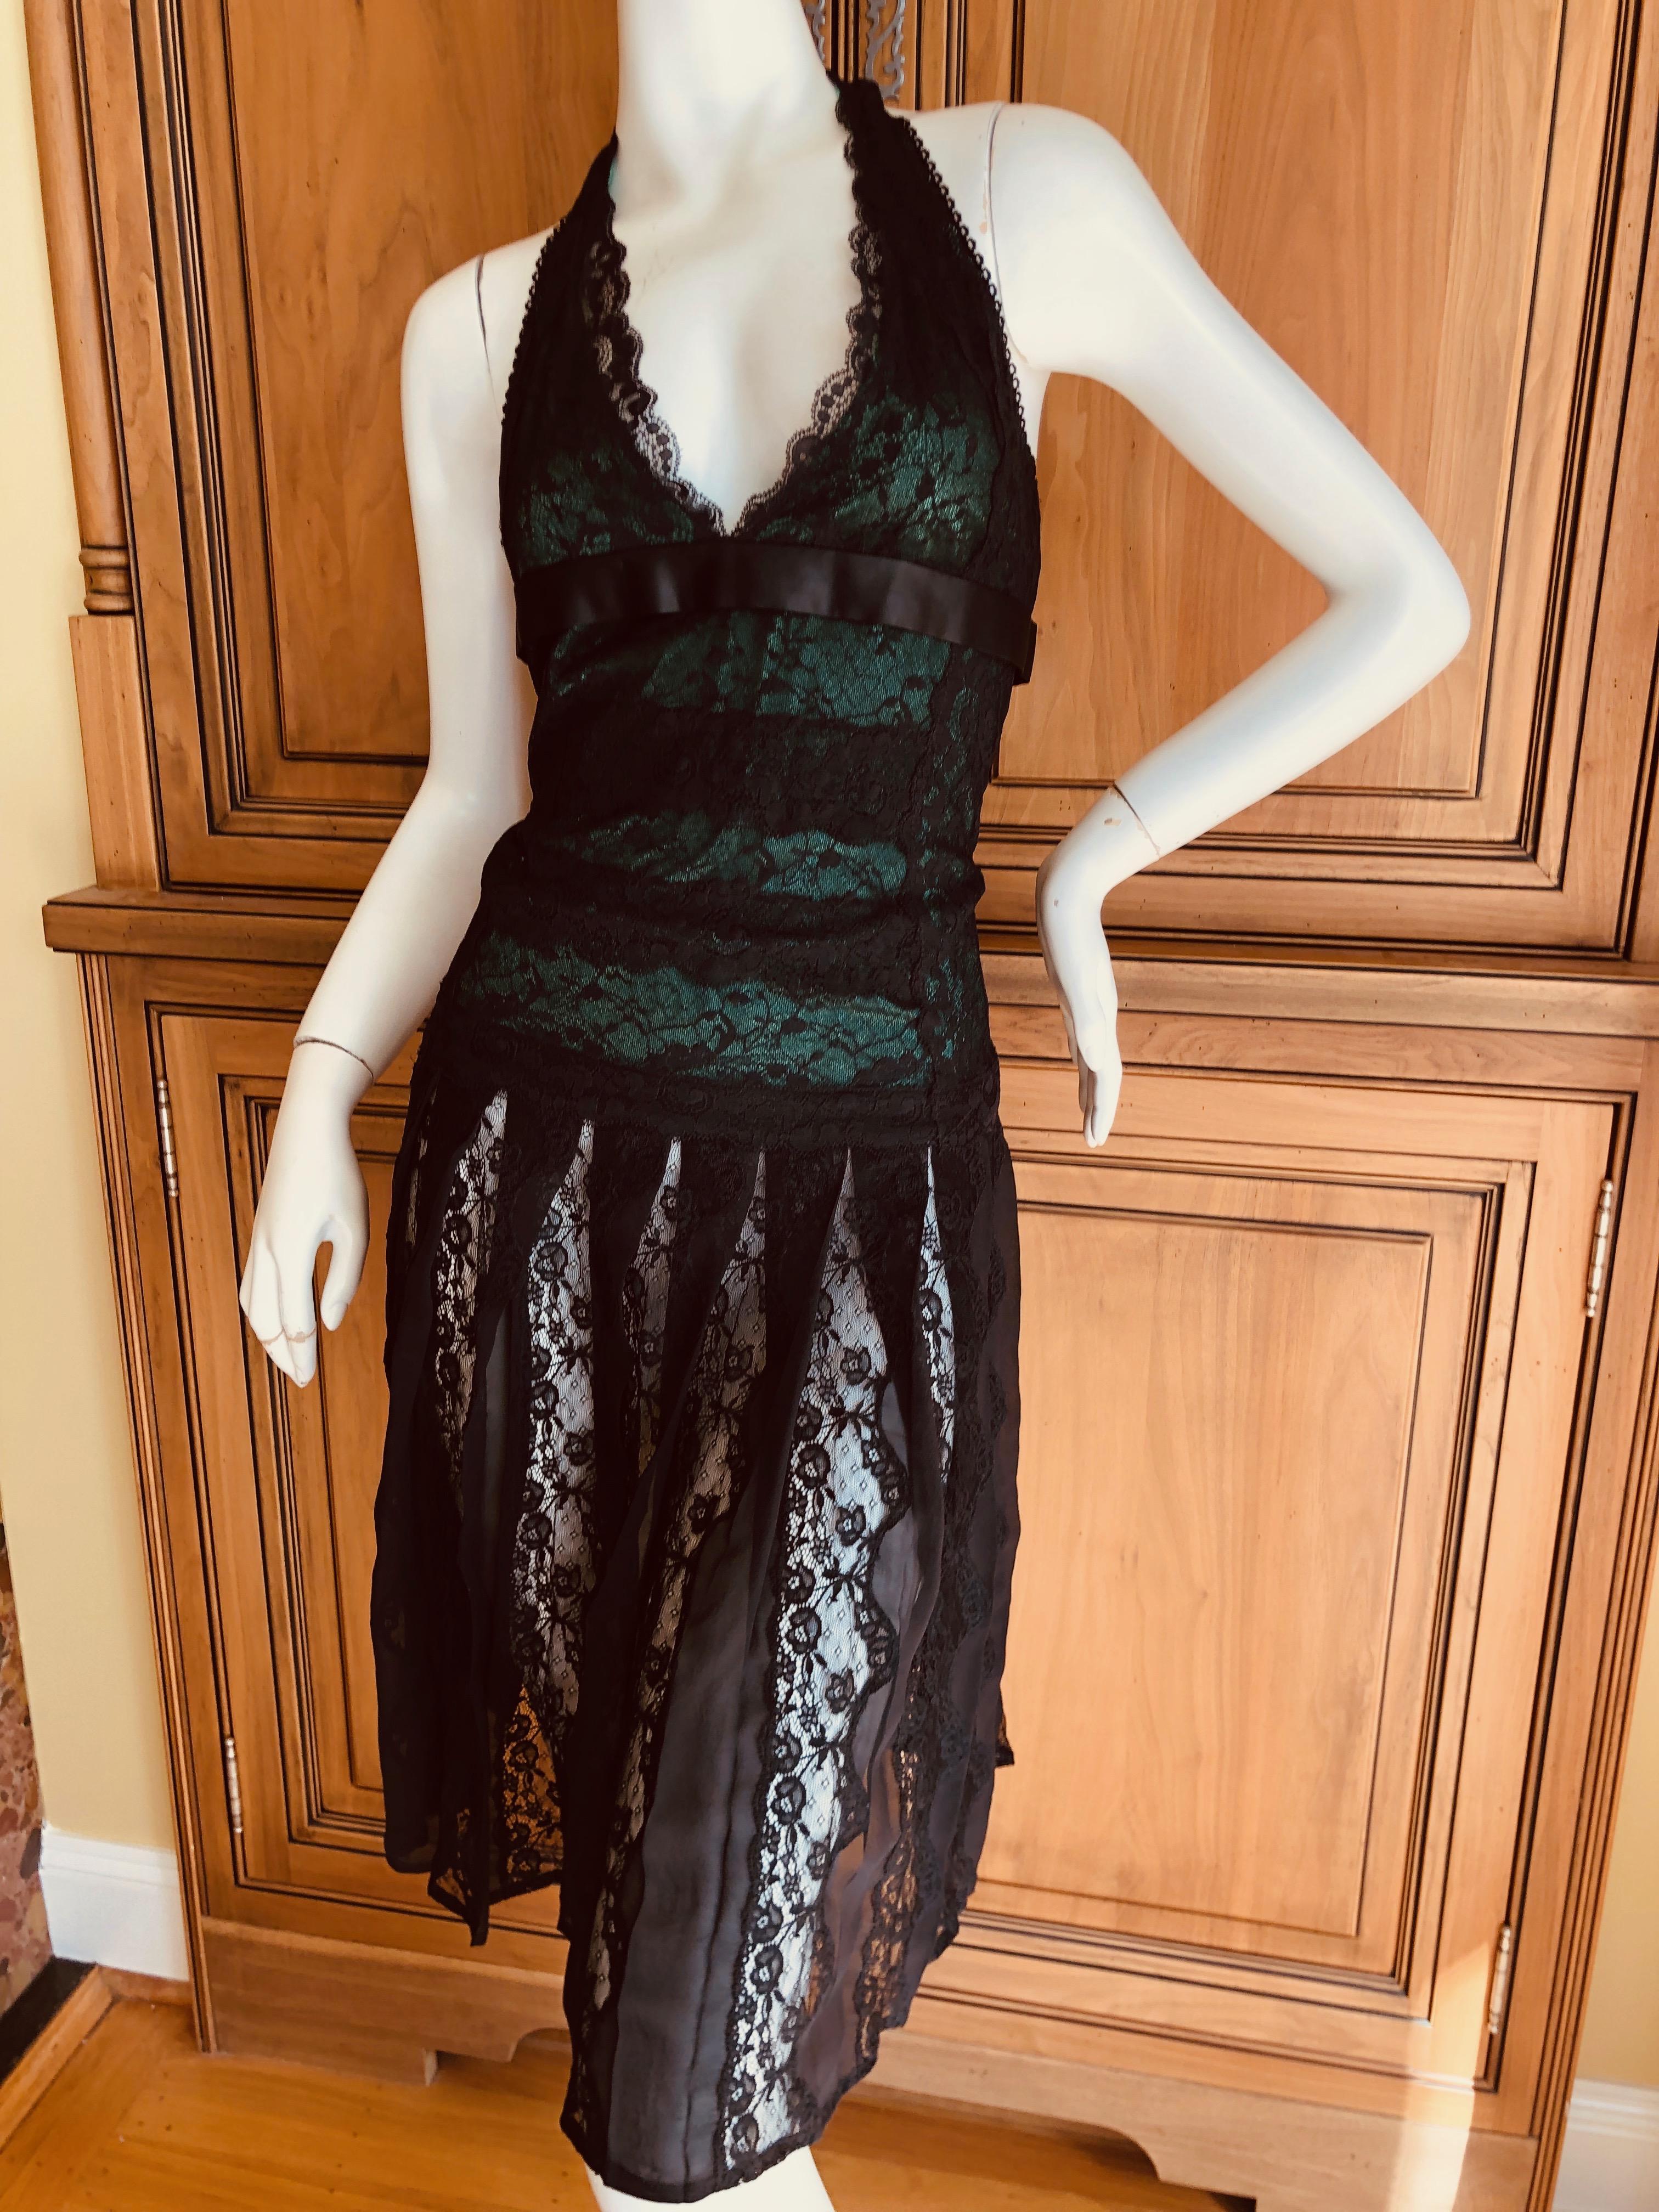 Dolce & Gabbana D&G Vintage Sheer Black and Green Lace Cocktail Dress 
Size 40
Bust 34